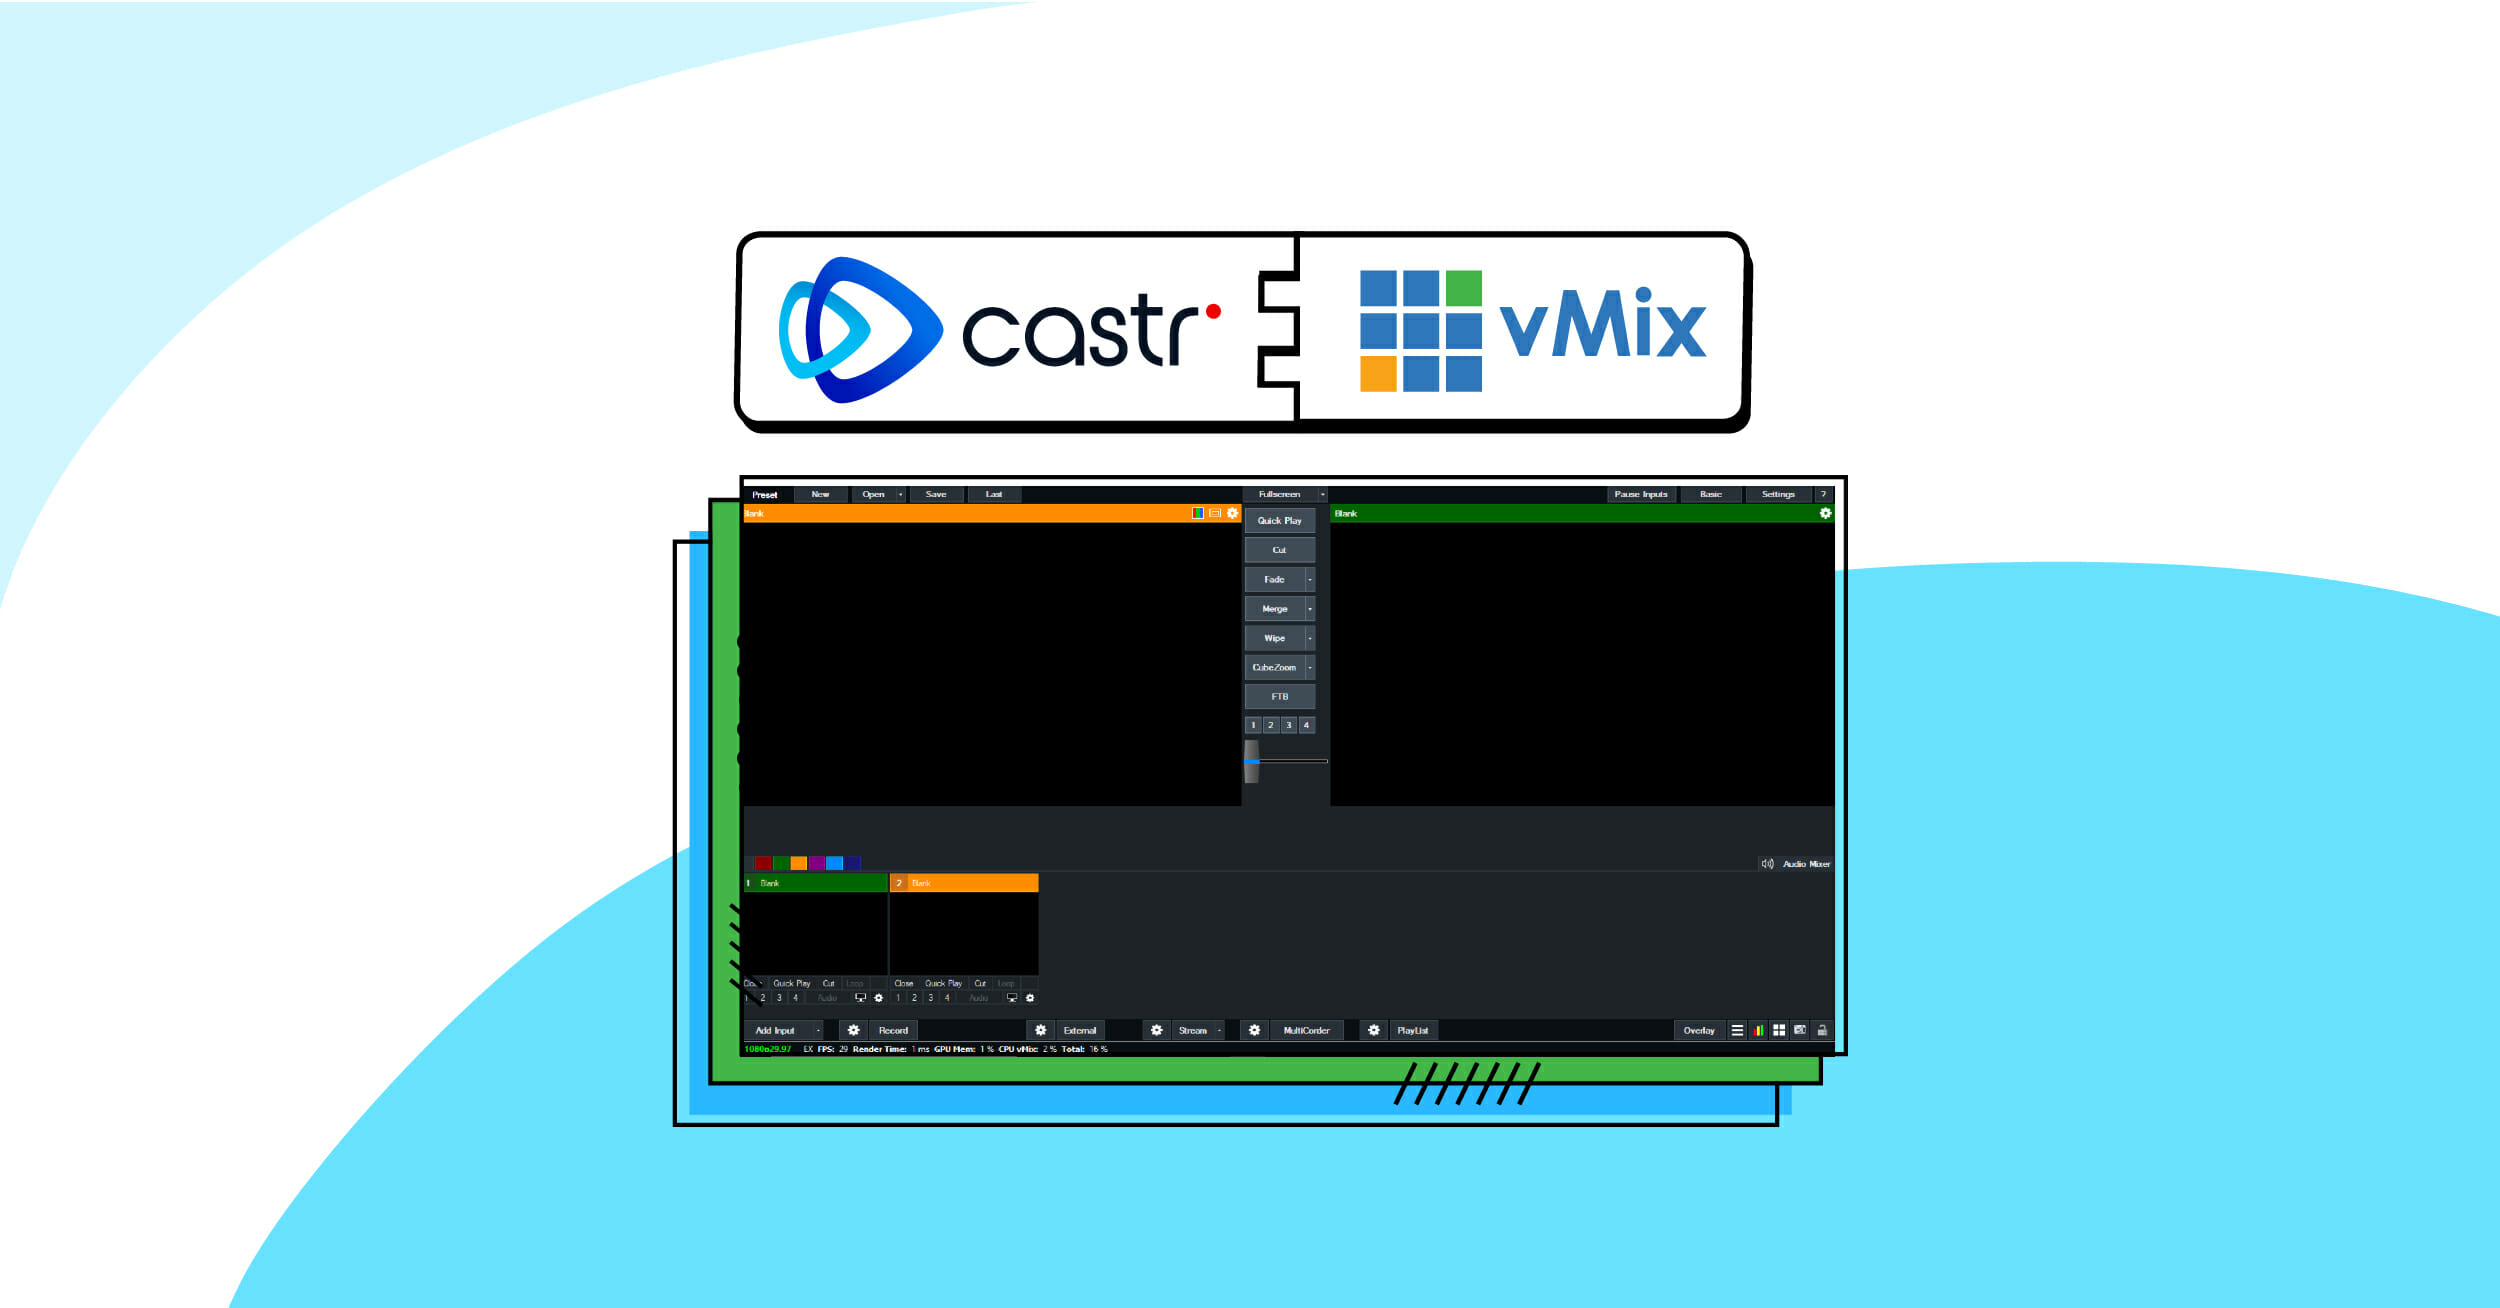 How to connect Castr to vMix